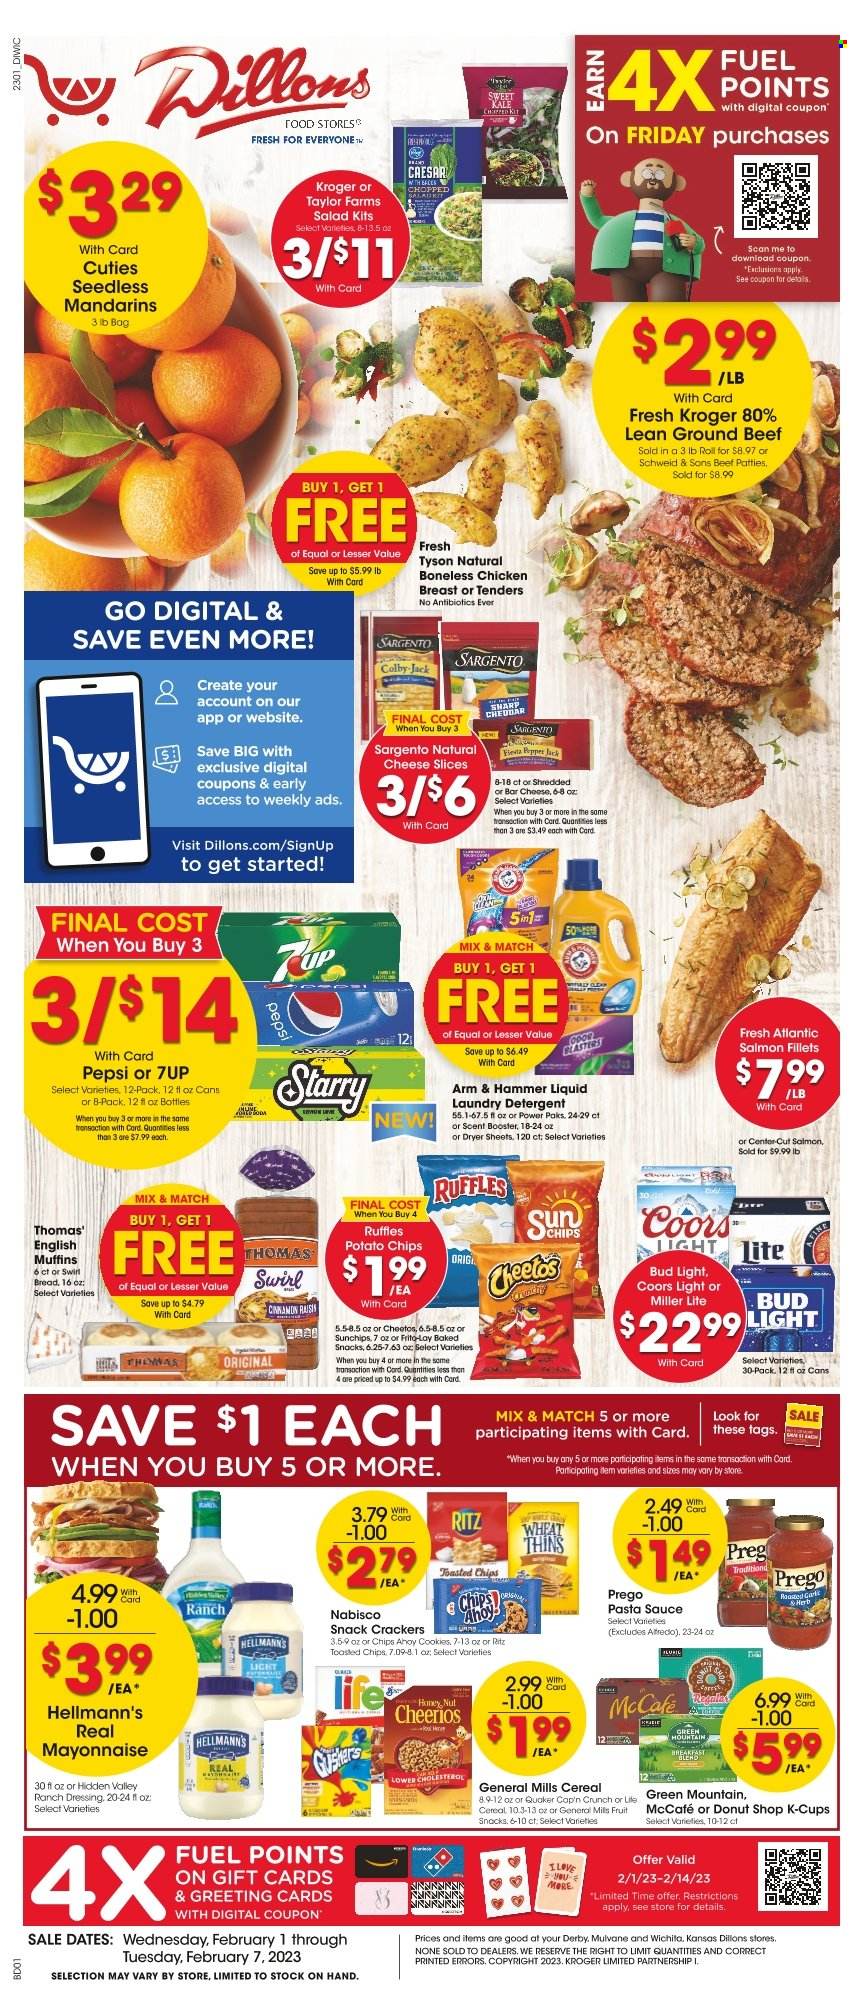 thumbnail - Dillons Flyer - 02/01/2023 - 02/07/2023 - Sales products - english muffins, salad, mandarines, salmon, salmon fillet, pasta sauce, sauce, Quaker, Colby cheese, sliced cheese, Pepper Jack cheese, Sargento, Oreo, mayonnaise, ranch dressing, Hellmann’s, cookies, crackers, fruit snack, RITZ, potato chips, Cheetos, chips, Thins, Frito-Lay, Ruffles, ARM & HAMMER, cereals, Cheerios, Cap'n Crunch, dressing, Pepsi, 7UP, coffee capsules, McCafe, K-Cups, Green Mountain, beer, Bud Light, chicken breasts, beef meat, ground beef, detergent, laundry detergent, dryer sheets, Sharp, Miller Lite, Coors. Page 1.